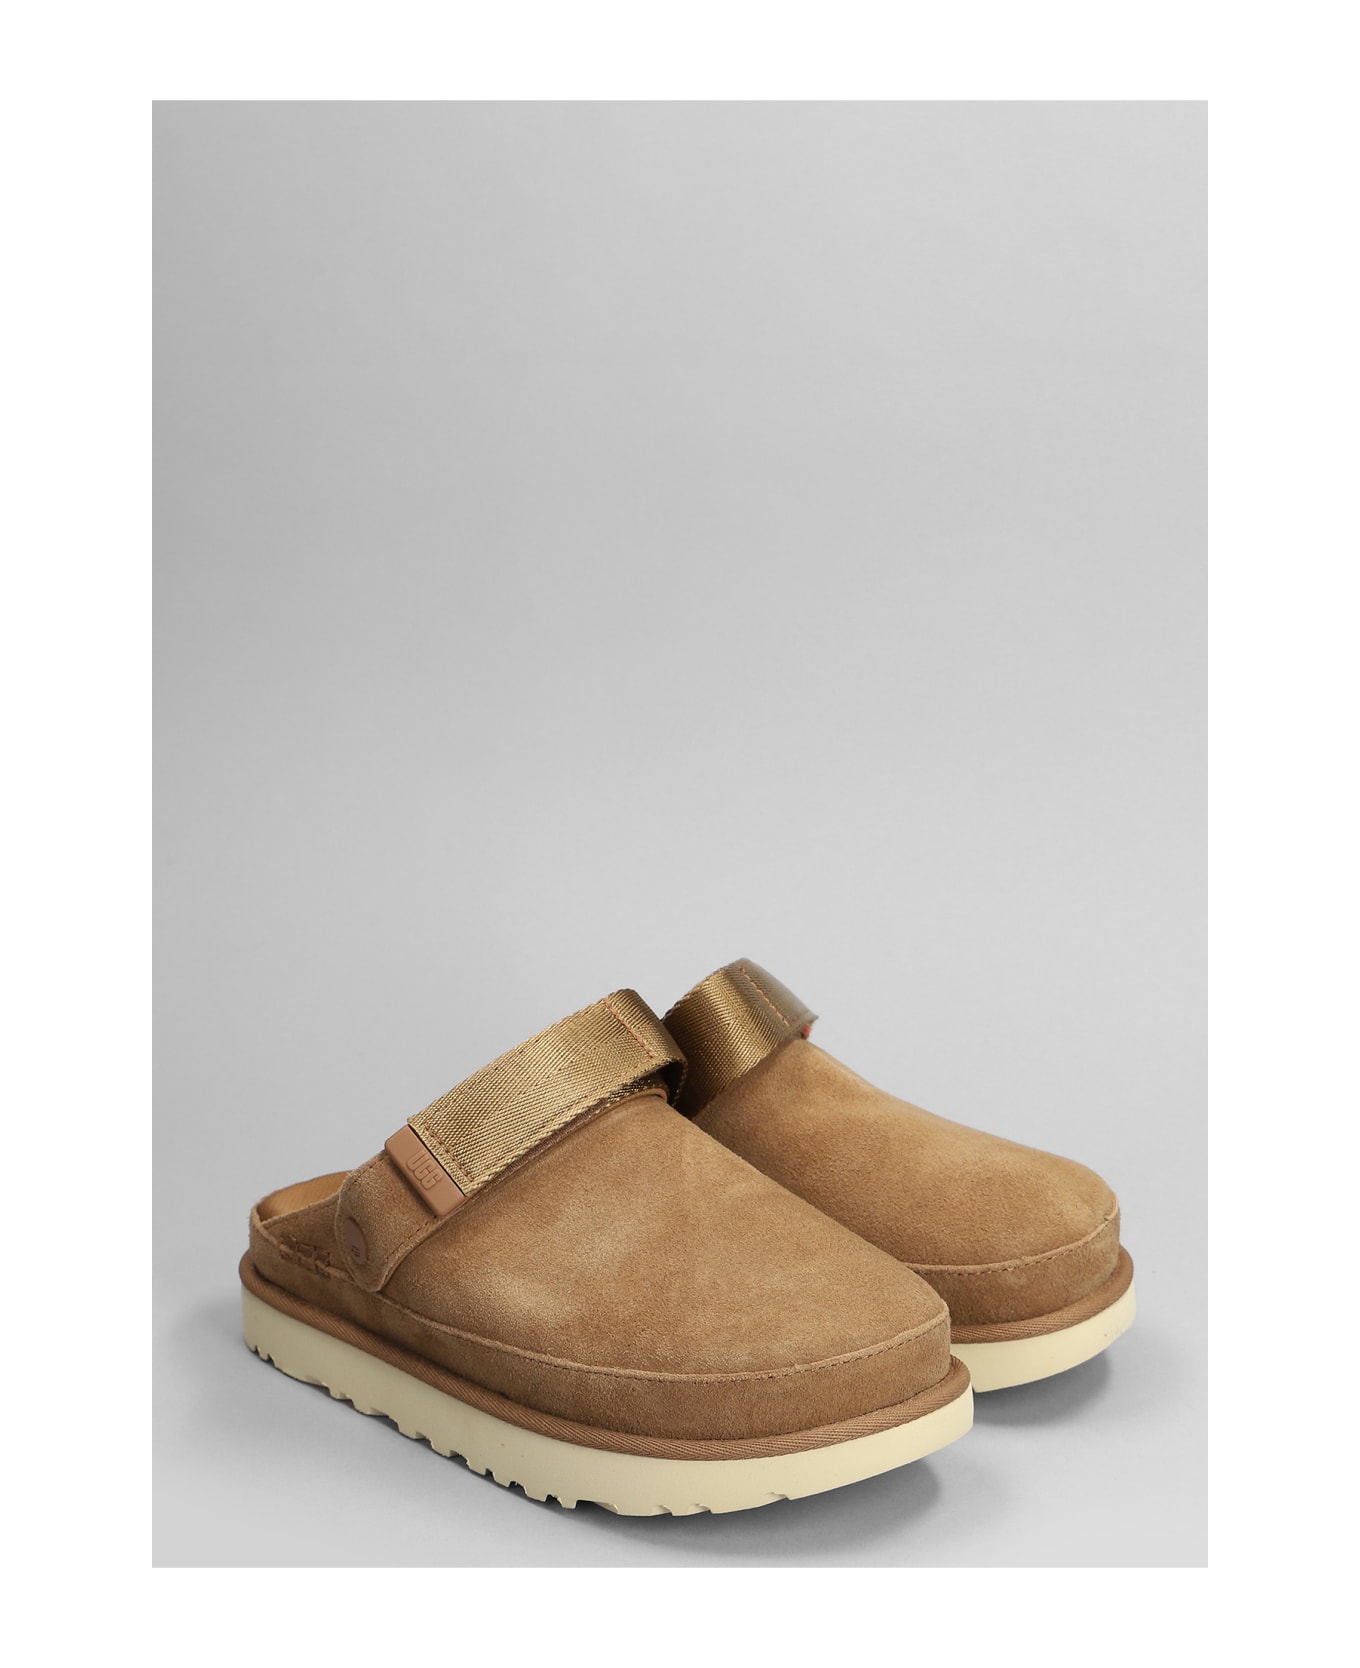 UGG Goldenstar Slipper-mule In Leather Color Suede - leather color サンダル